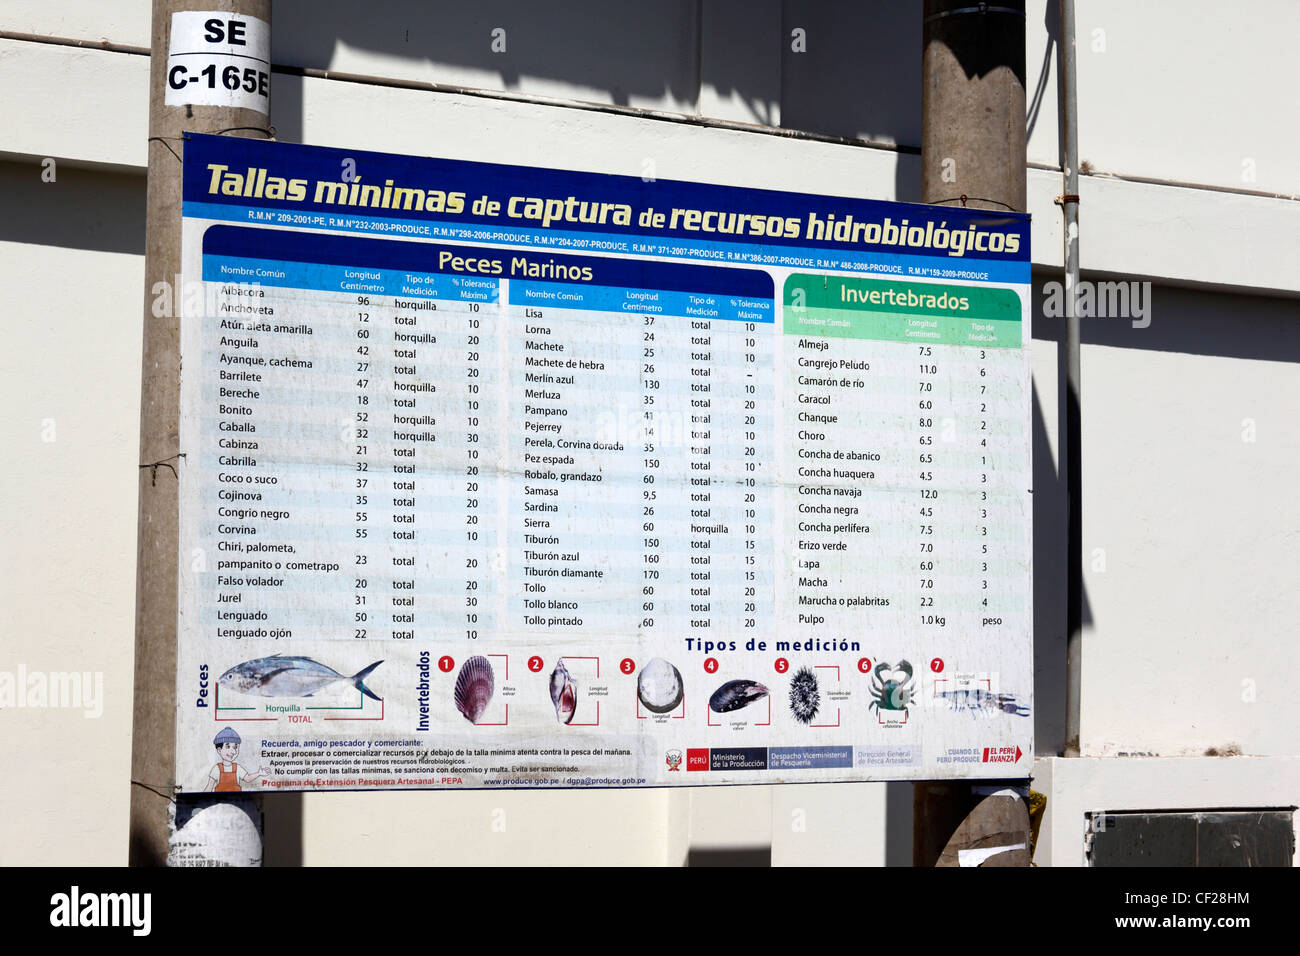 Sign in Spanish language showing minimum sizes of fish species than can be caught and sold legally, Ilo, Peru Stock Photo